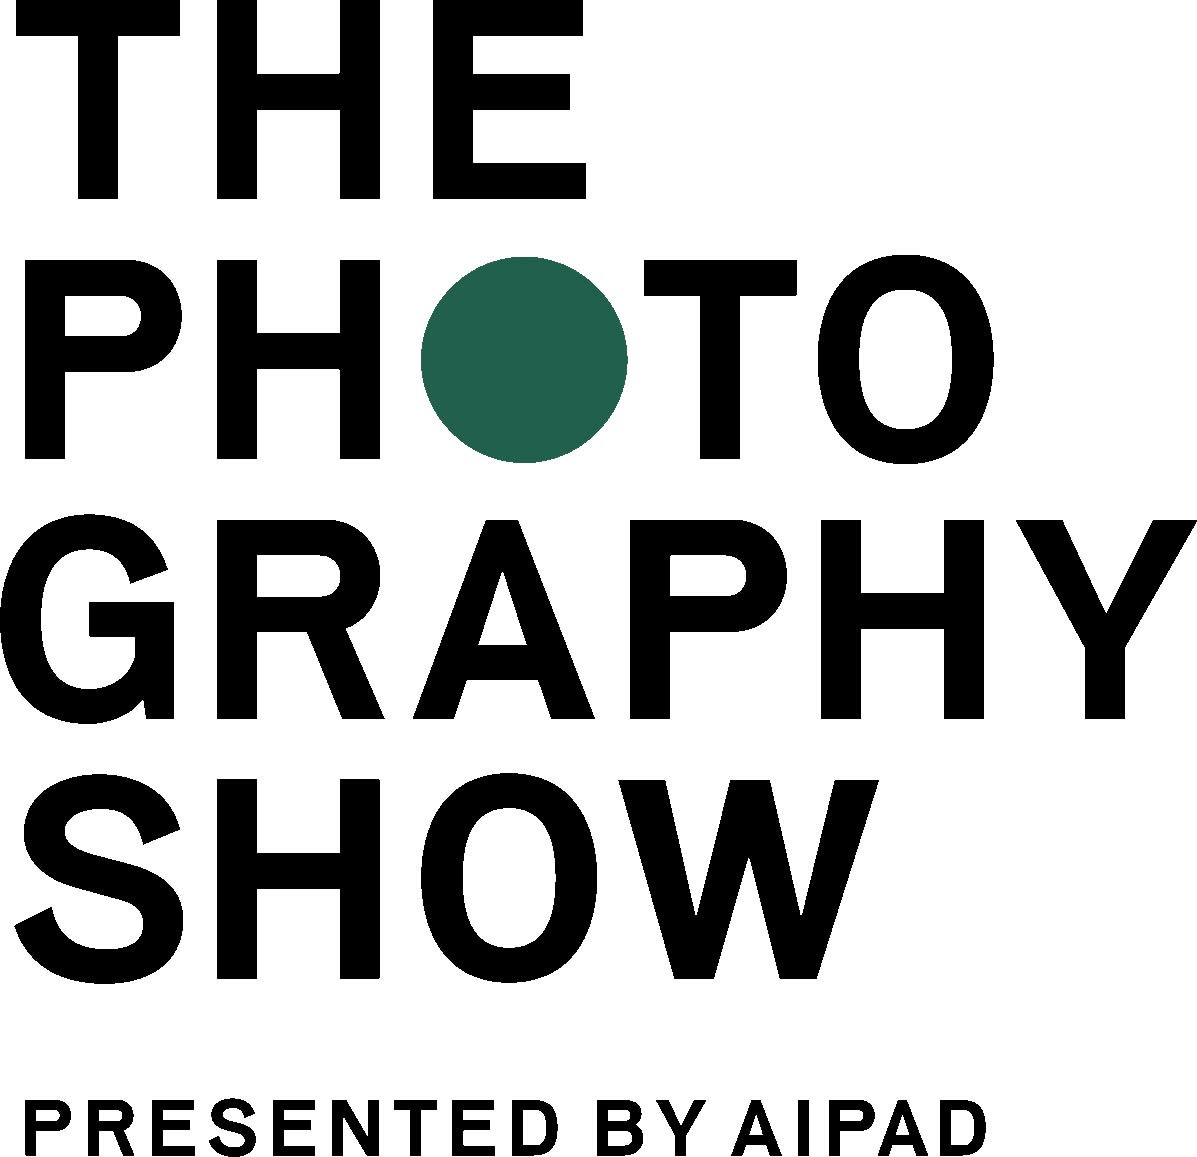 The Photography Show presented by AIPAD